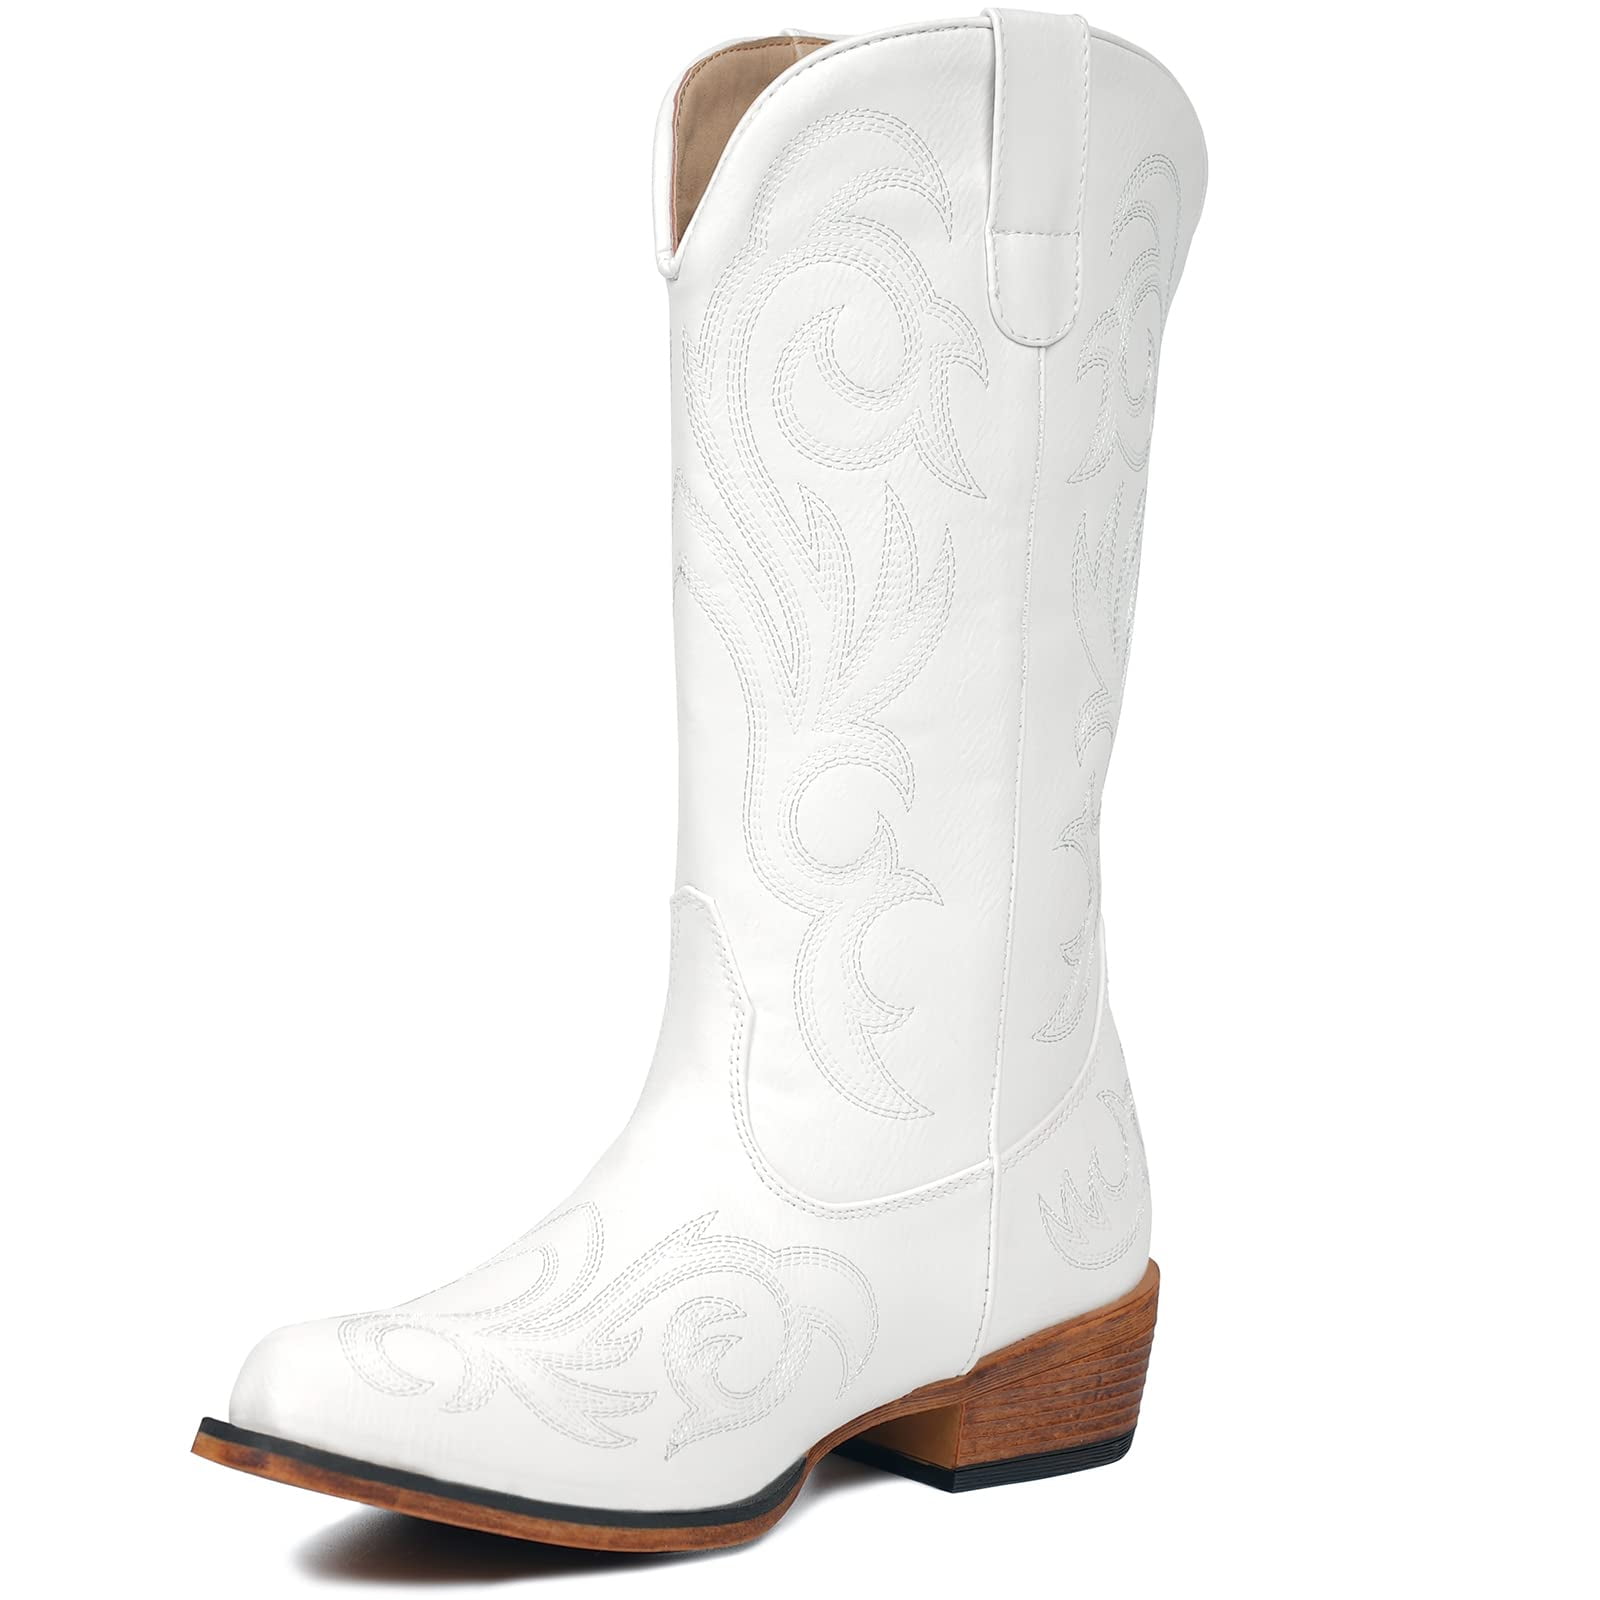 IUV Cowboy Boots For Women Pointy Toe Women's Western Boots Cowgirl ...